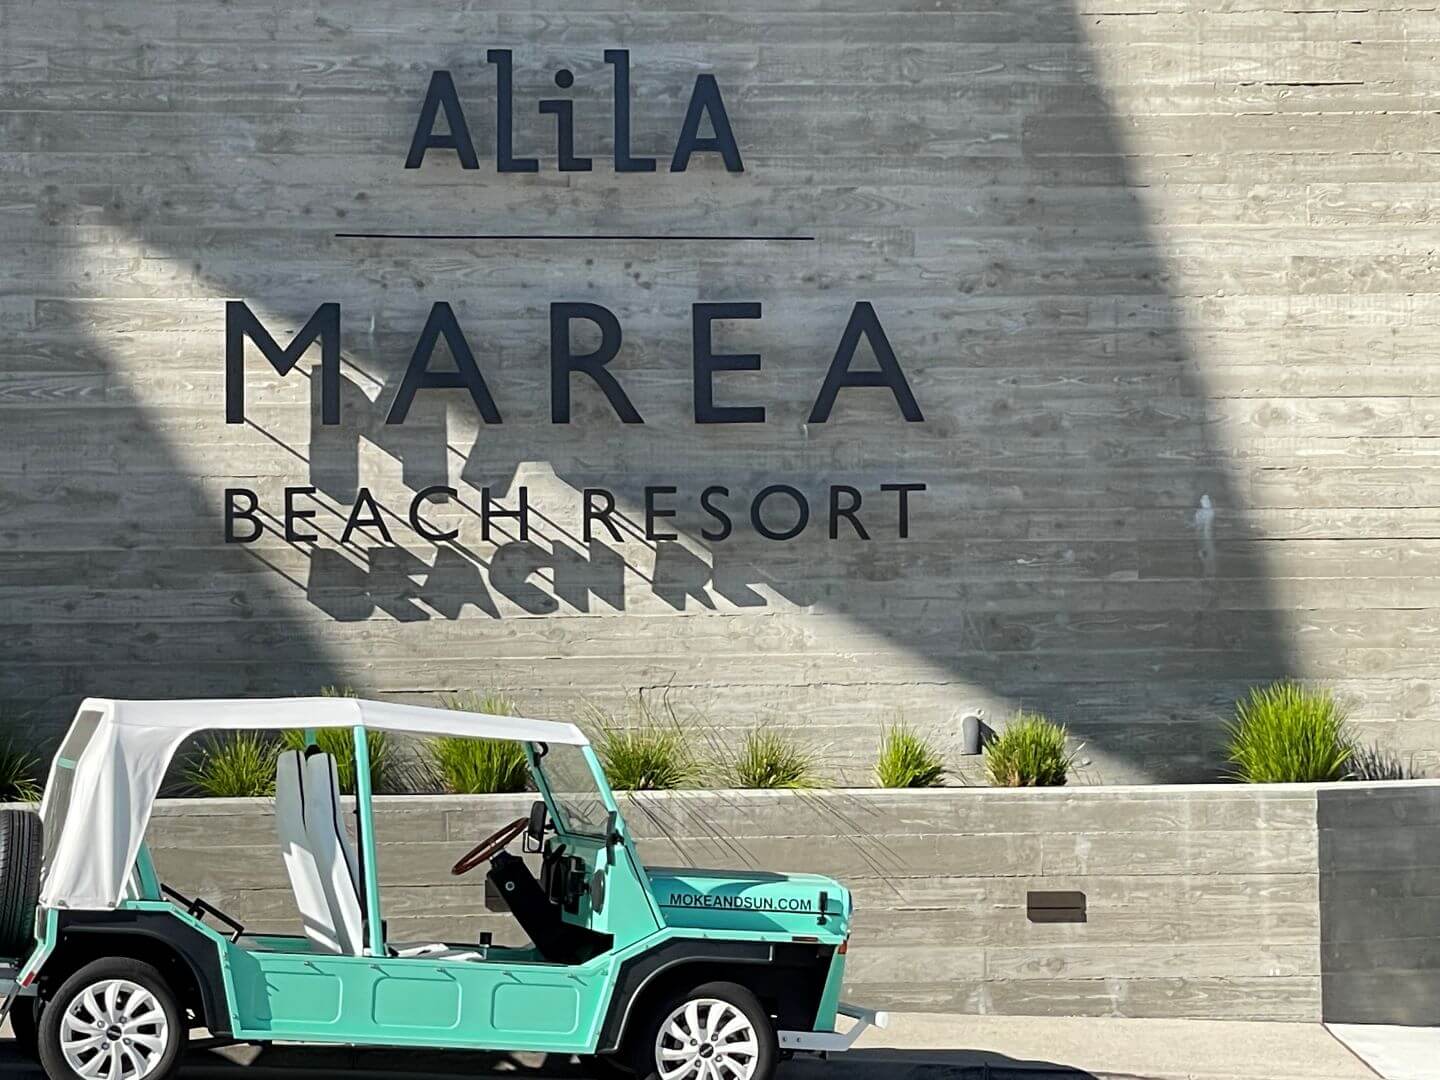 You are currently viewing A Complete Guide and Review to Alila Marea Beach Resort (Encinitas, CA)